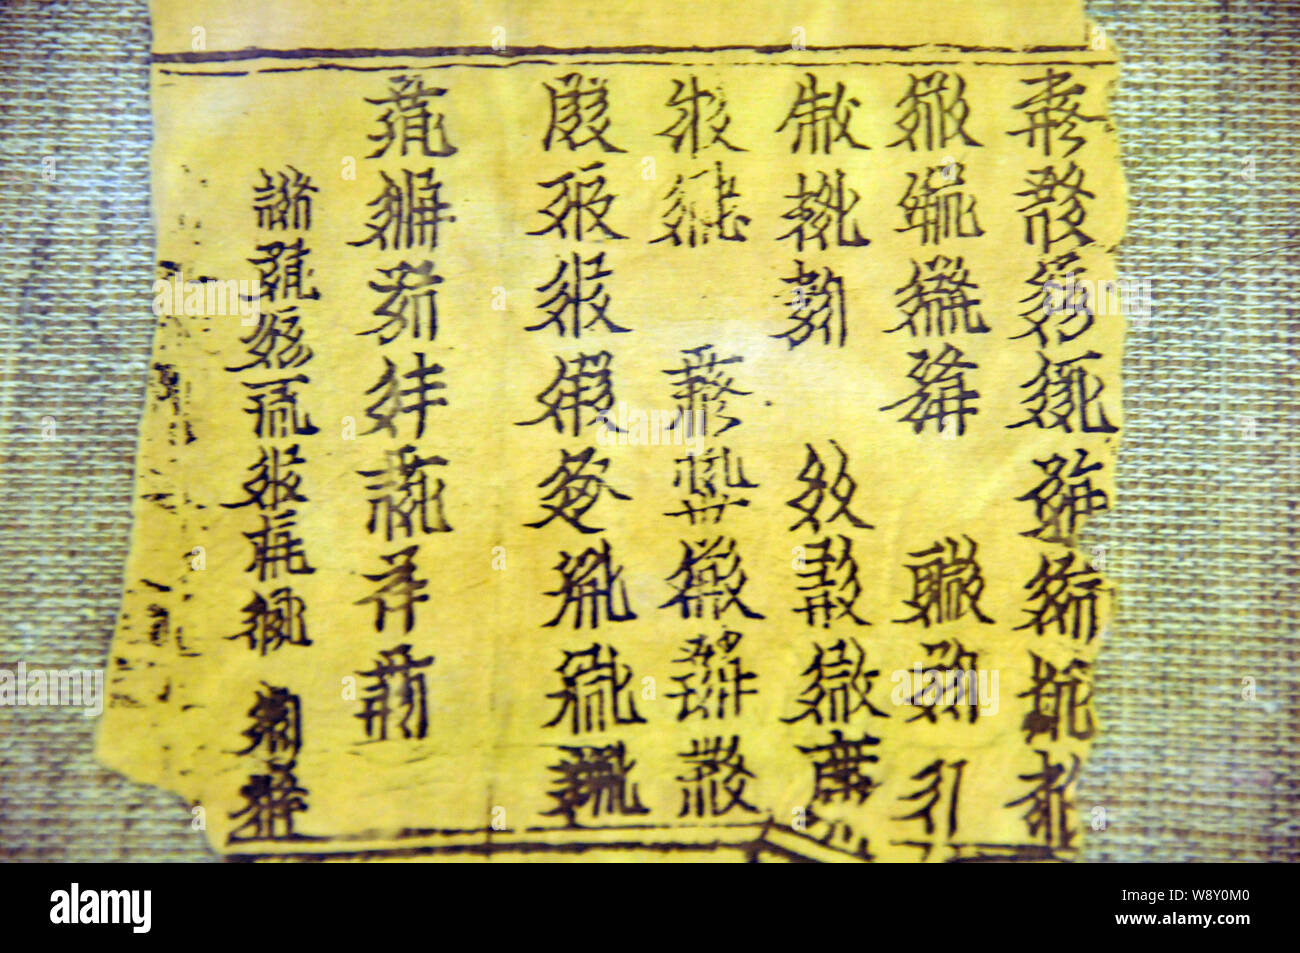 A script of Tangut characters is displayed at Wuwei Tangut Museum in Wuwei city, northwest China's Gansu province, 2 October 2013. Stock Photo